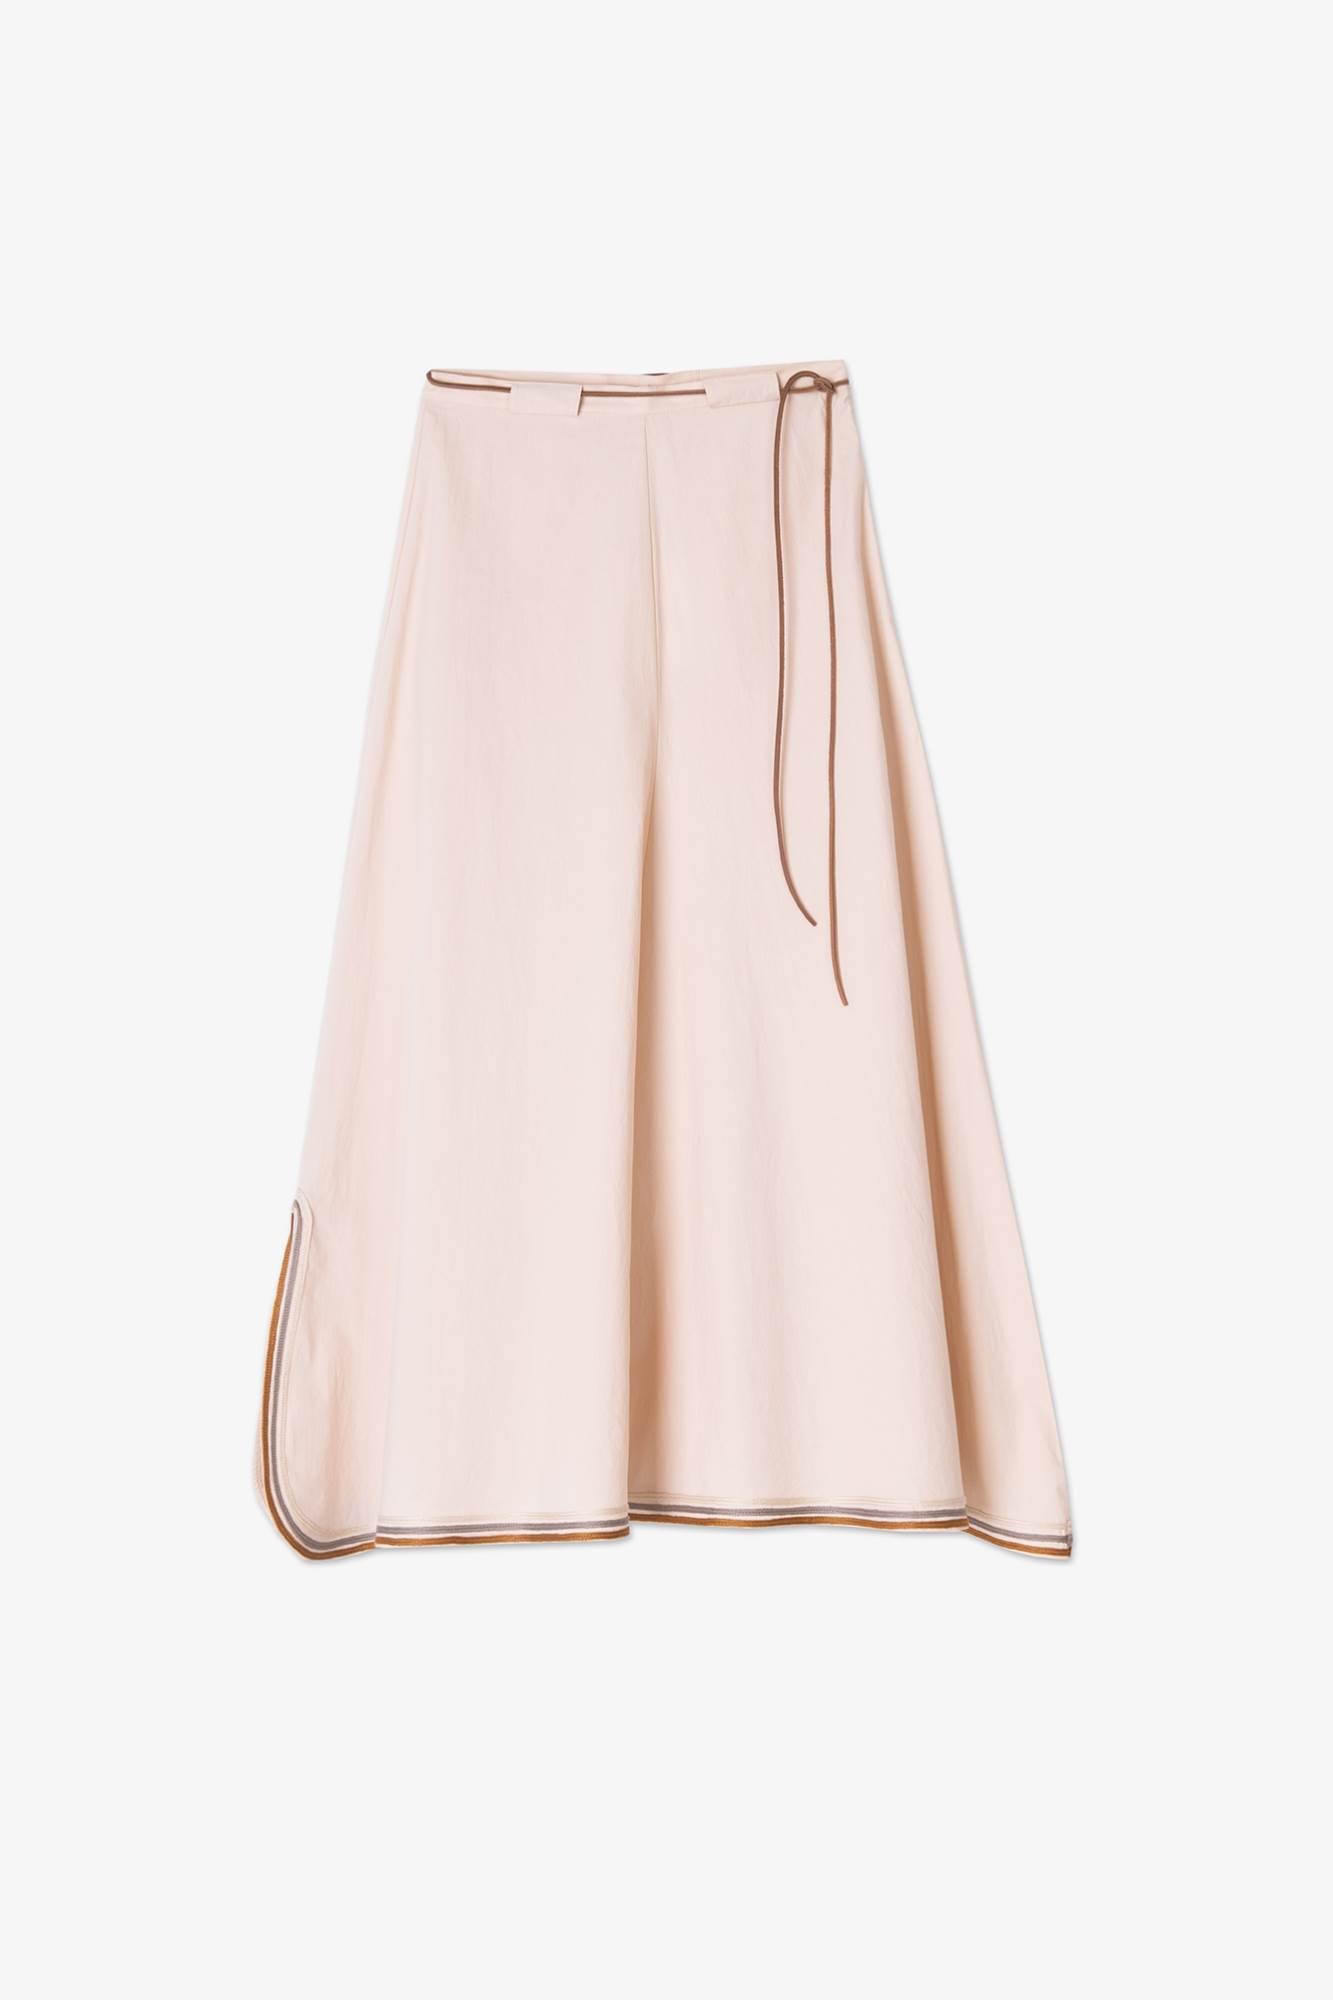 FLARED SKIRT WITH CONTRAST DETAILS